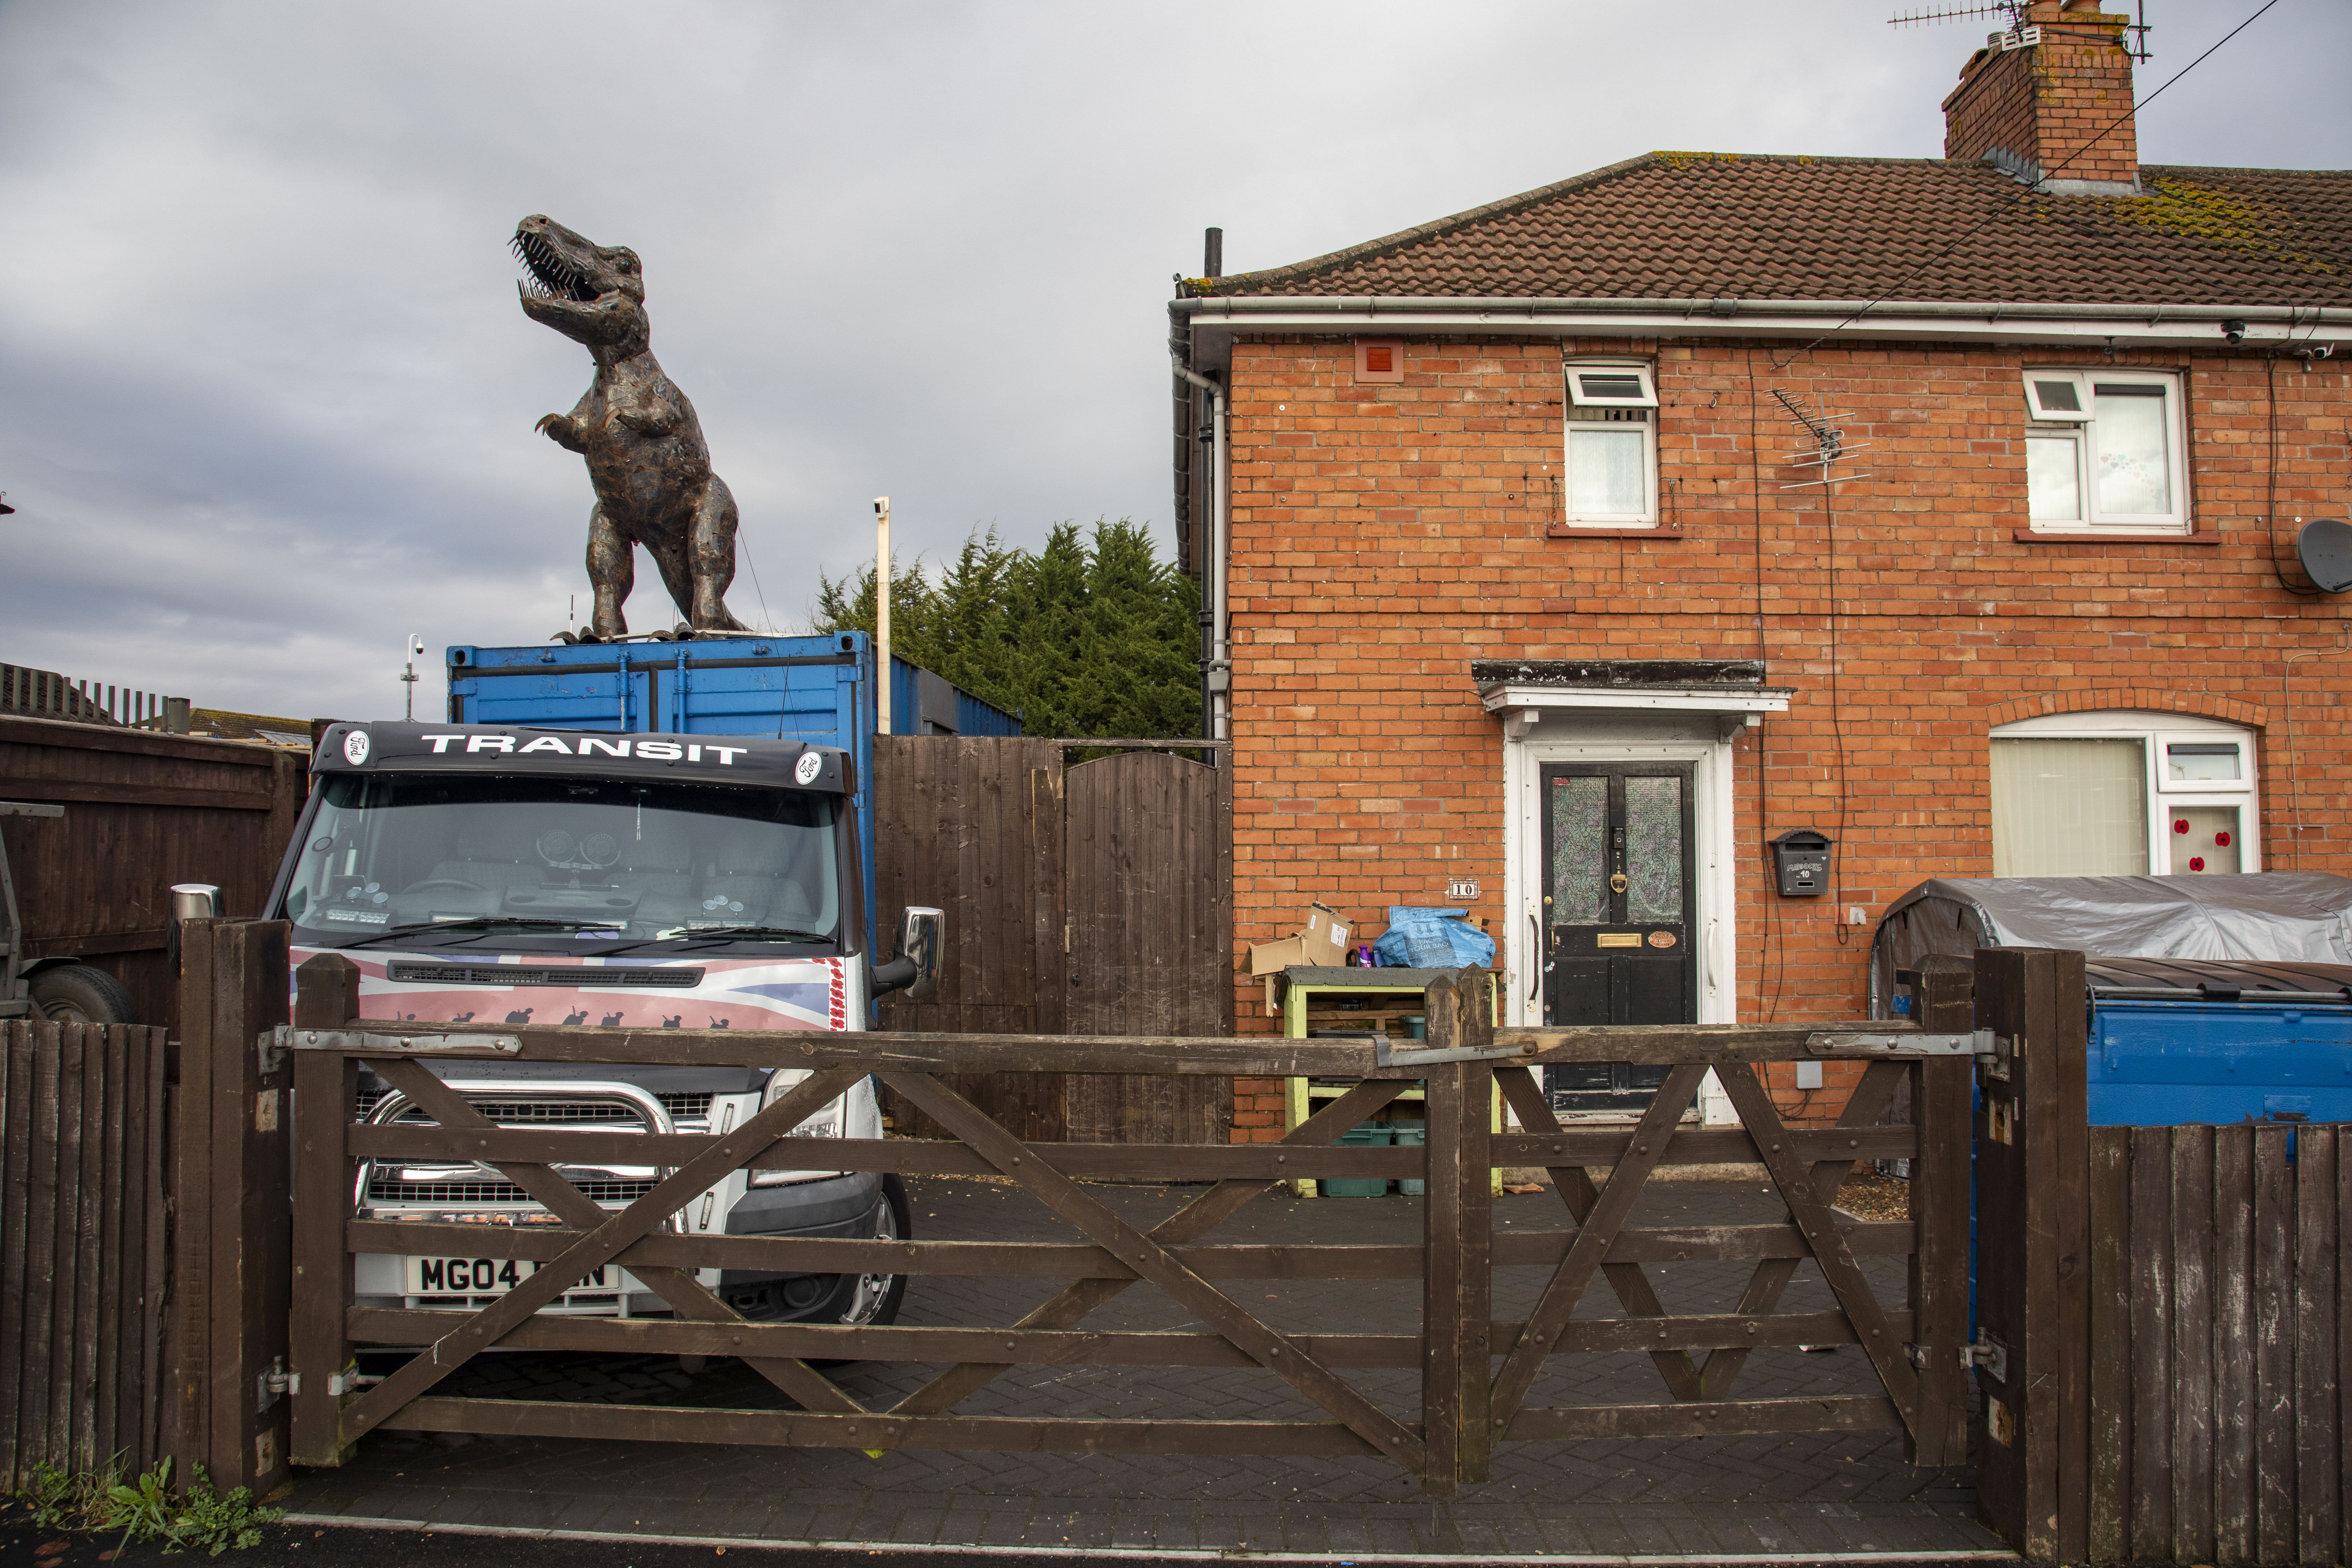 Locals have slammed their neighbour for placing a 10ft dinosaur in their driveway